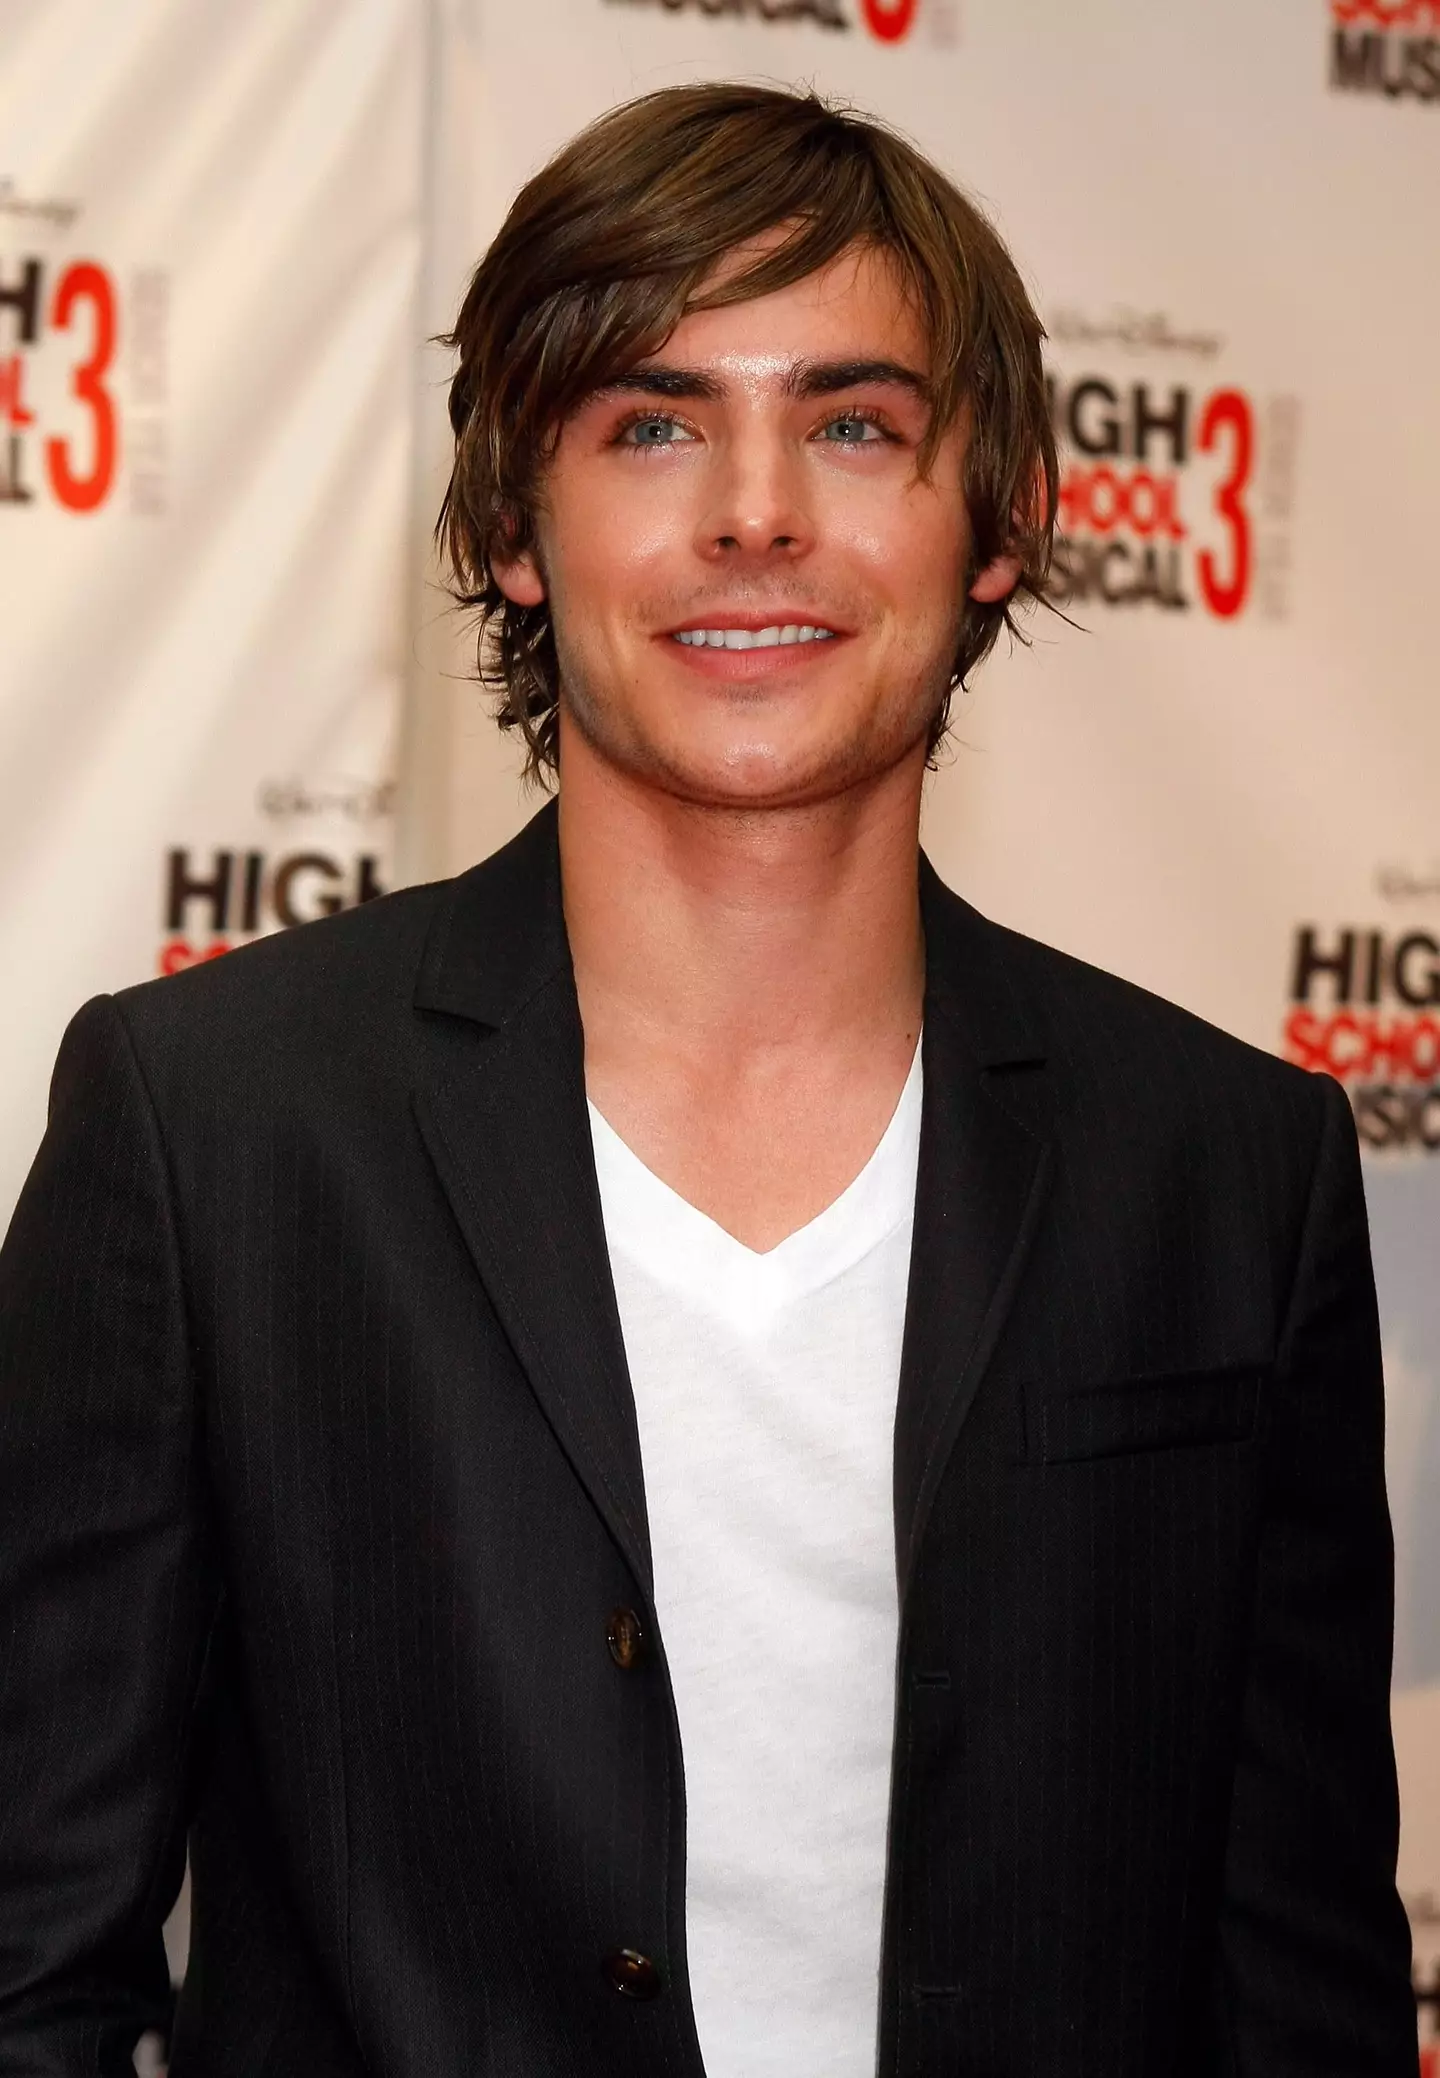 Efron at the premiere of High School Musical 3.